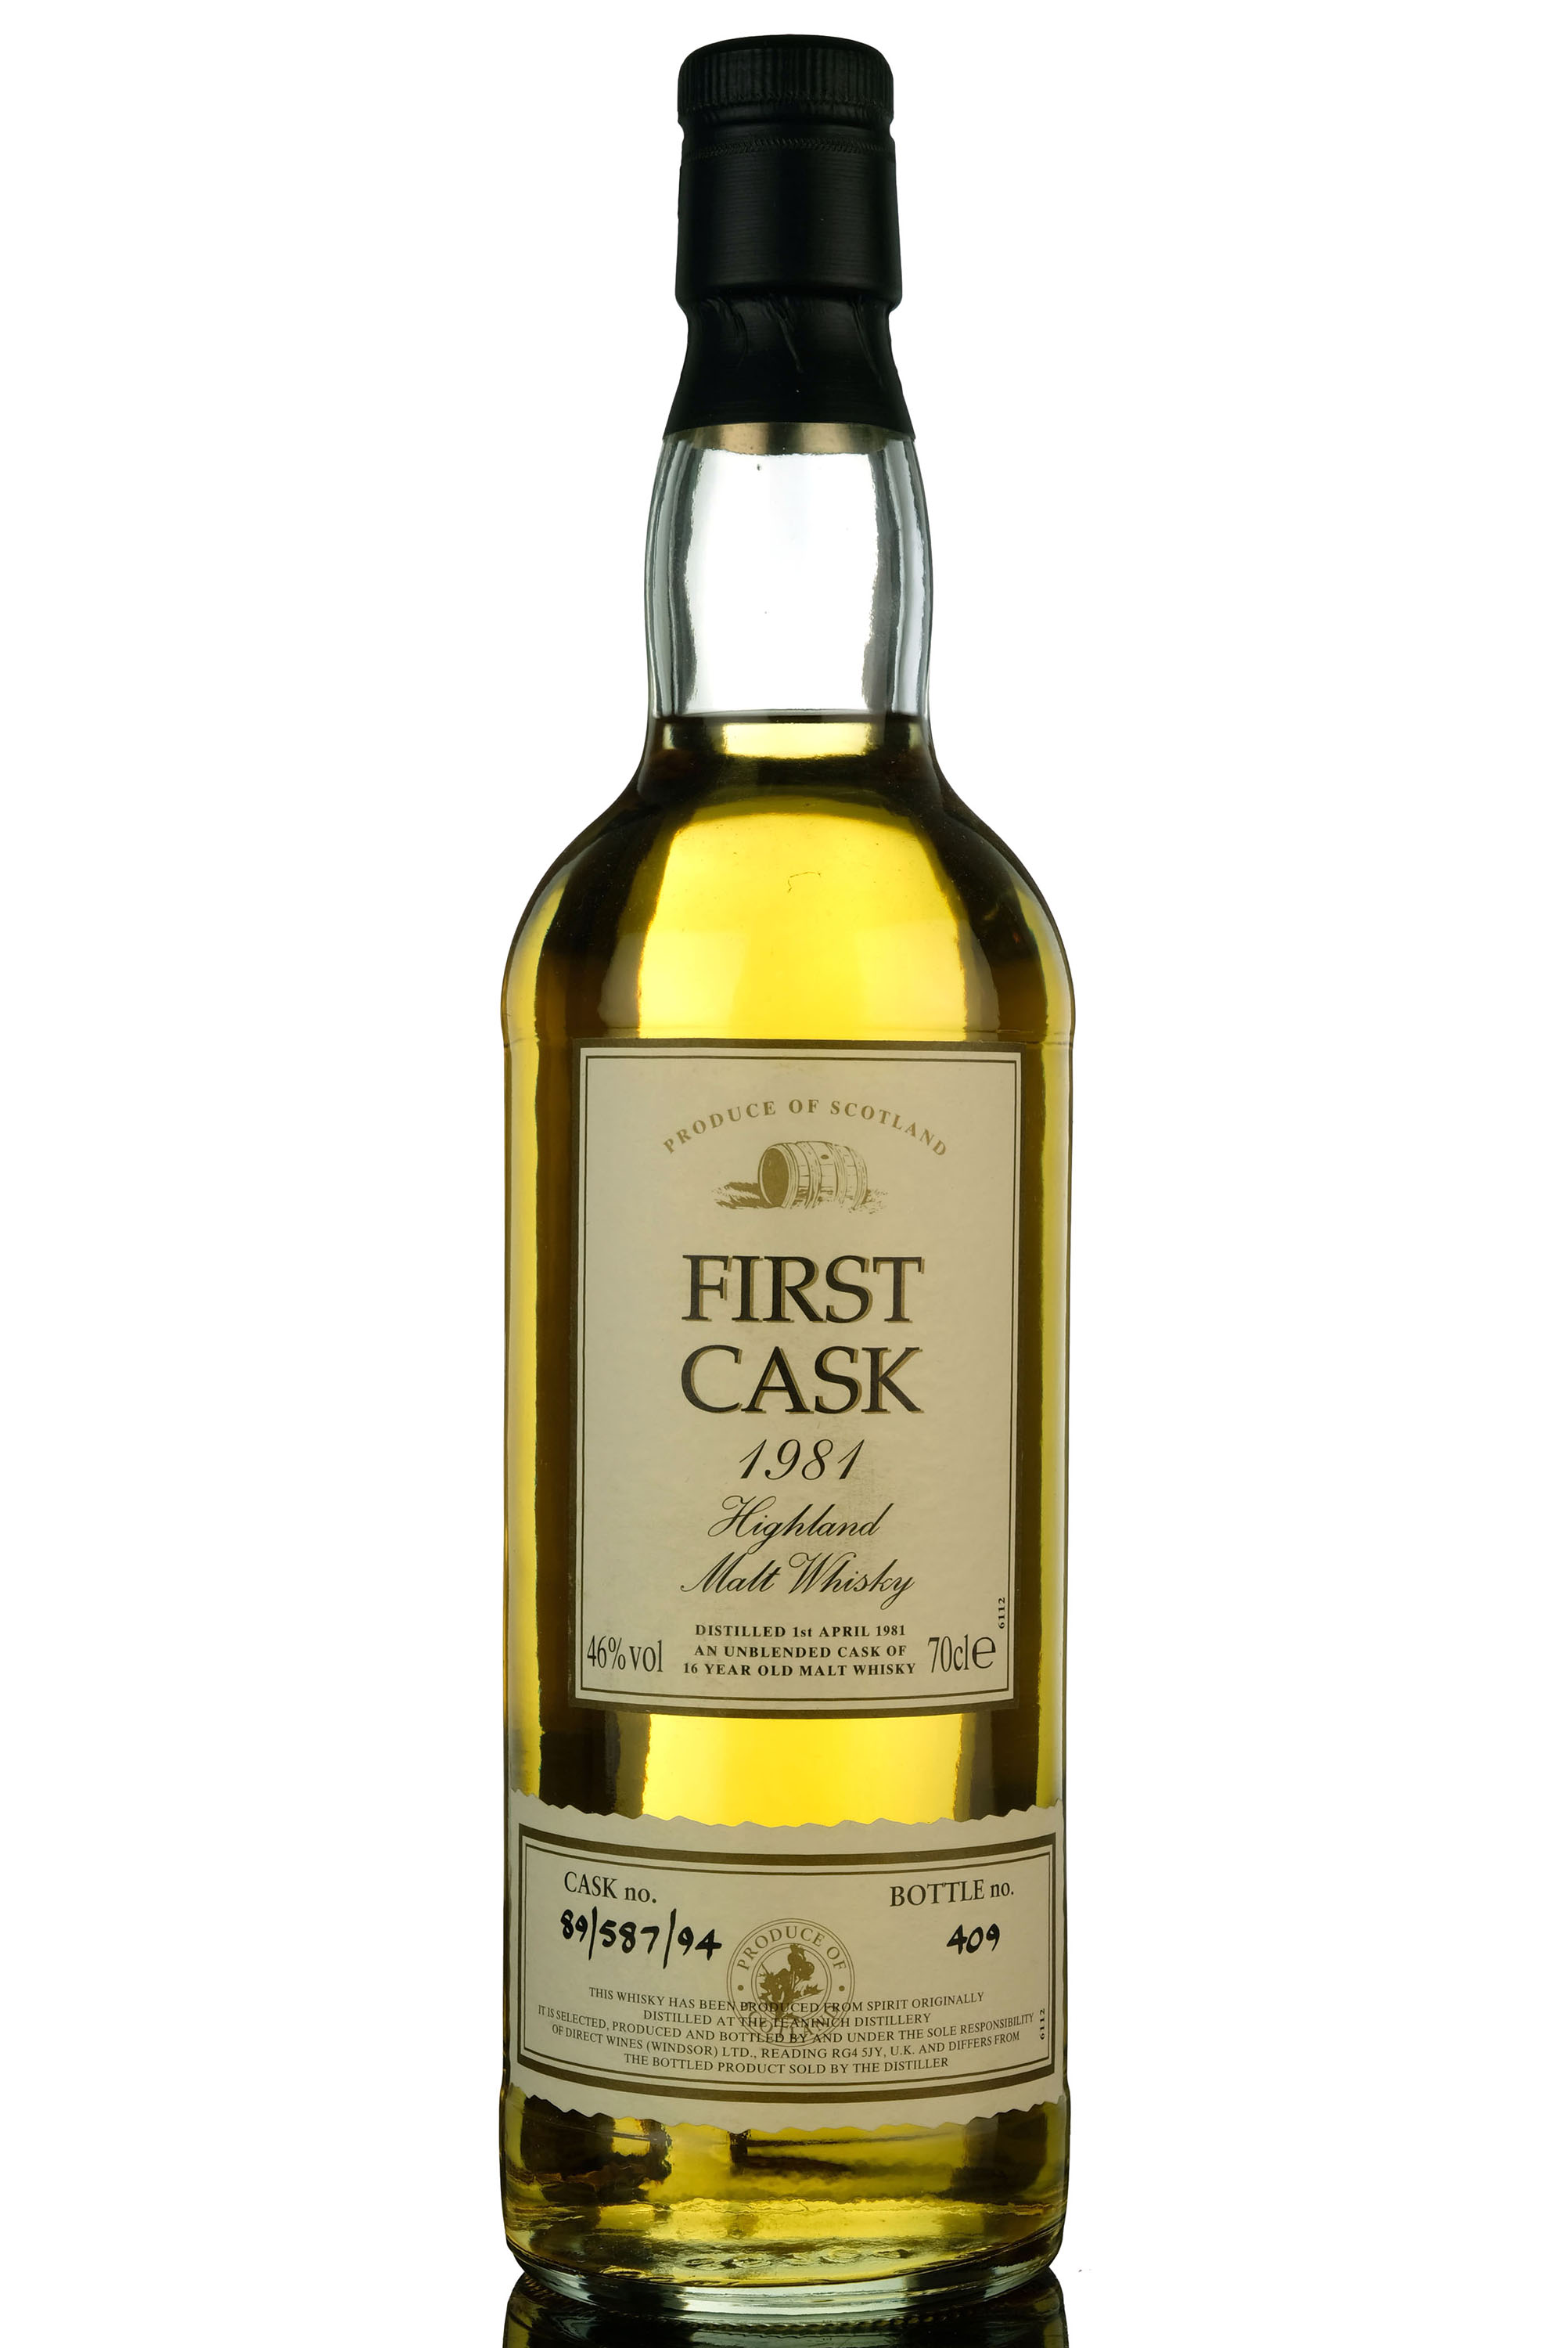 Teaninich 1981 - 16 Year Old - First Cask - Single Cask 89/587/94